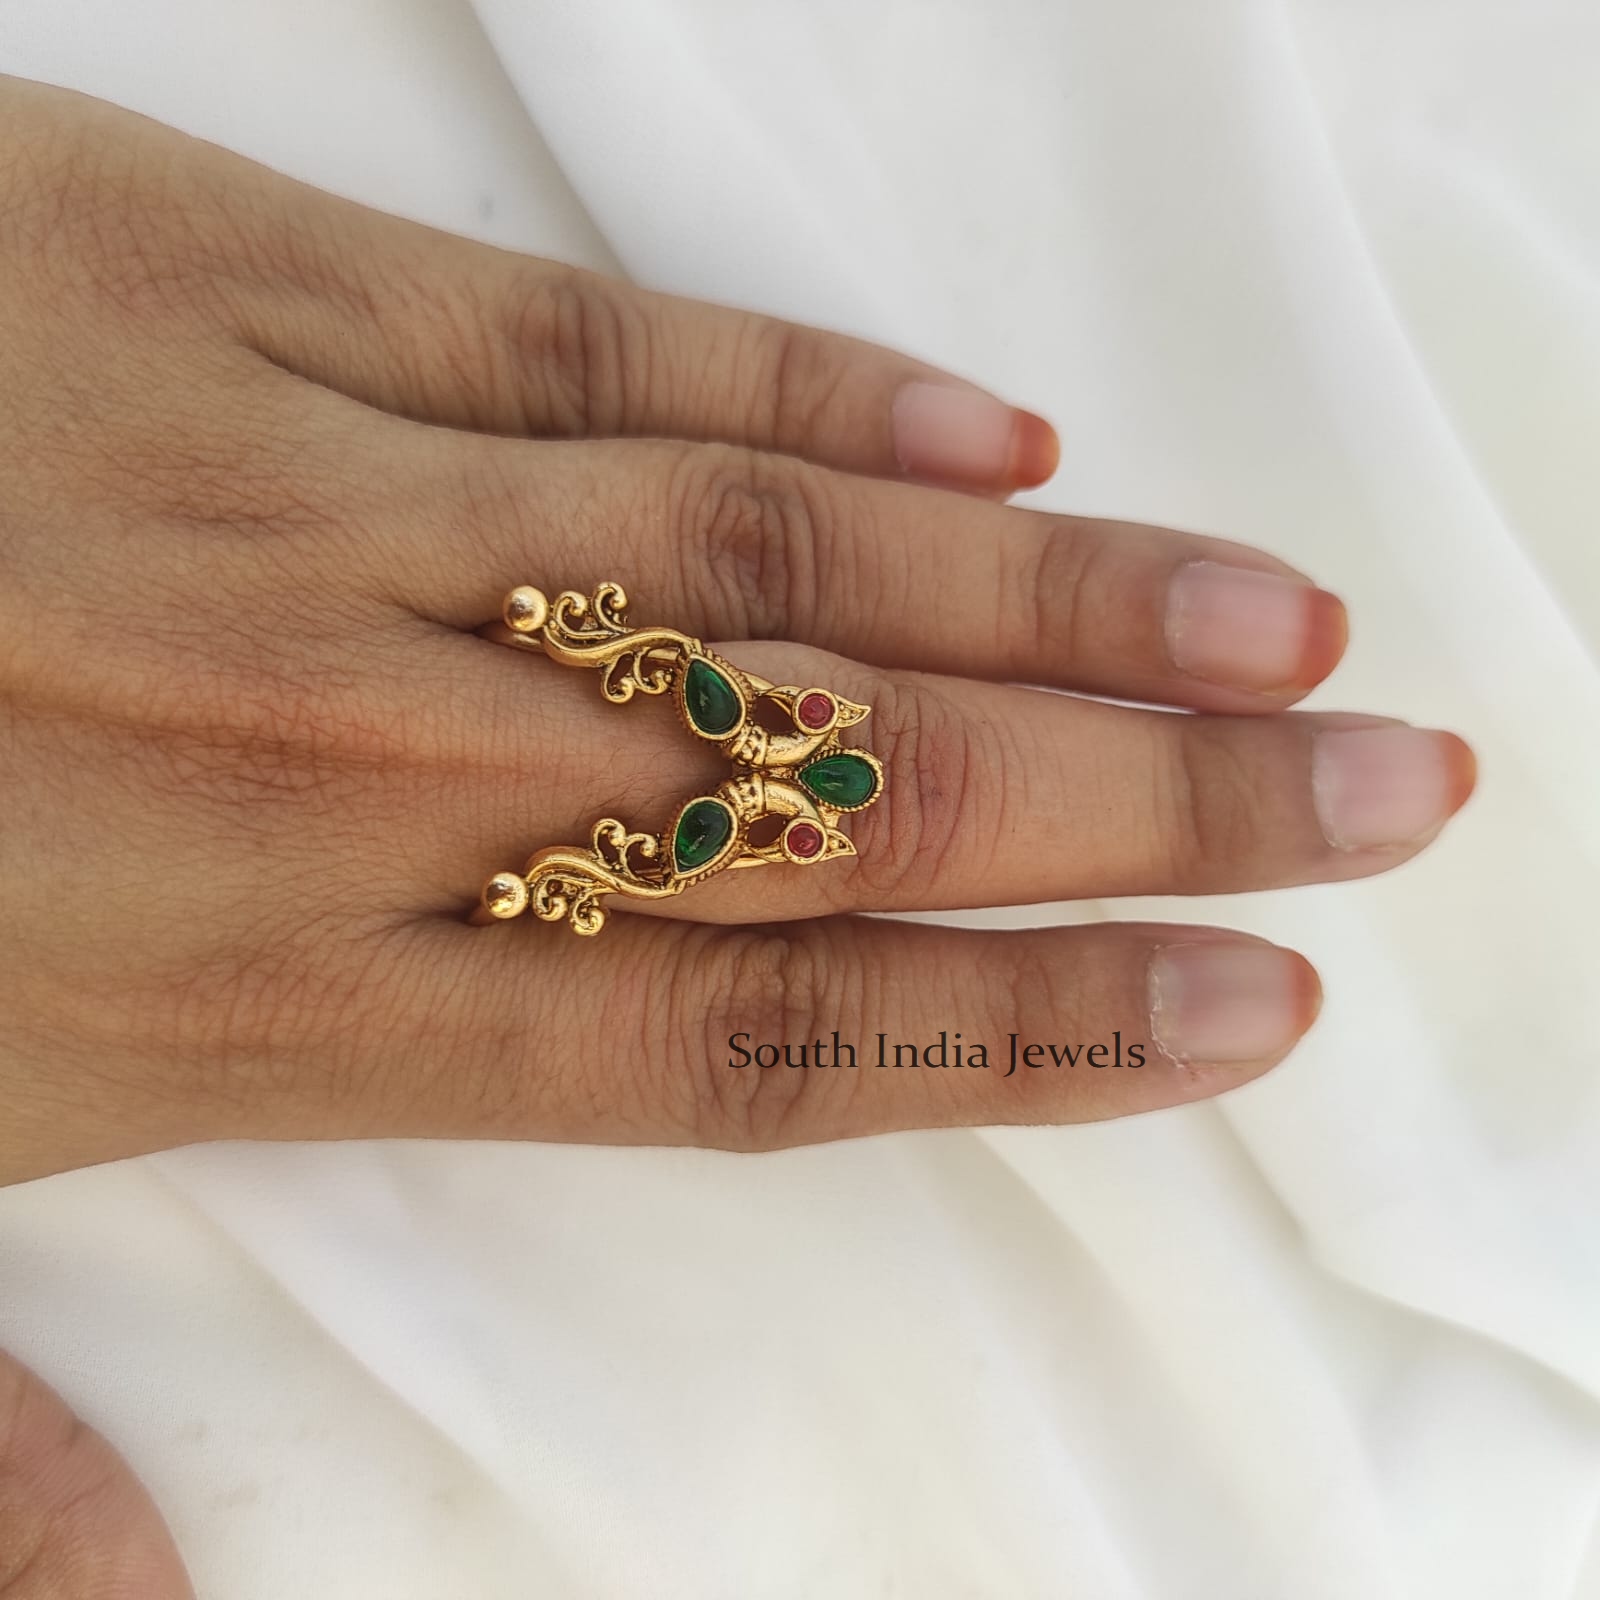 Shop Now Red Stone Finger Ring For Women By Bindhani